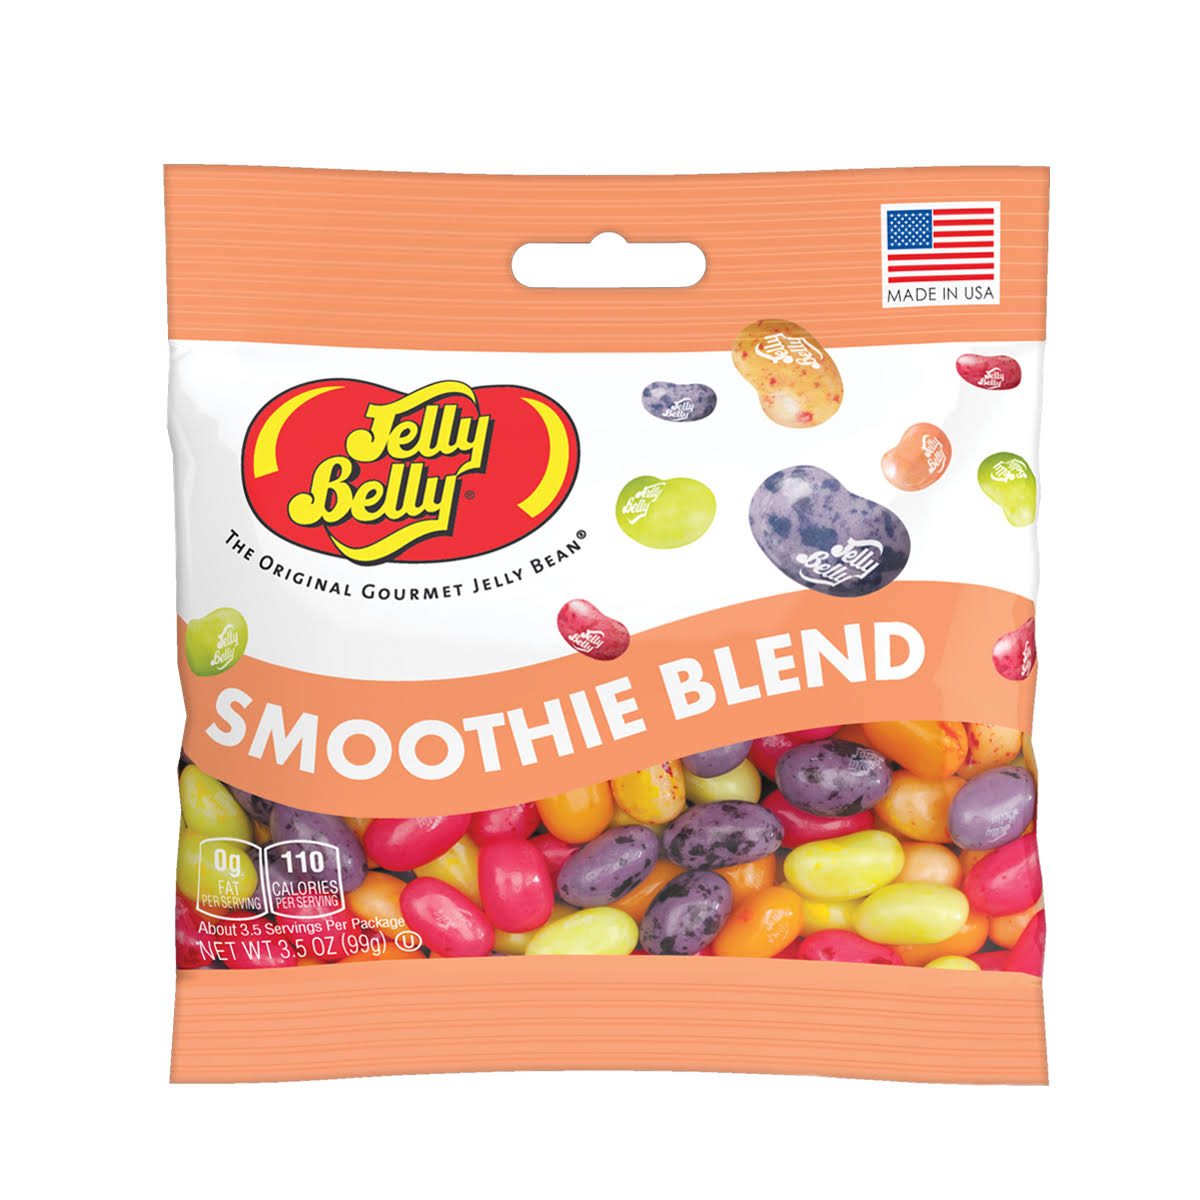 Jelly Belly Smoothie Blend Candy - 3.5 oz